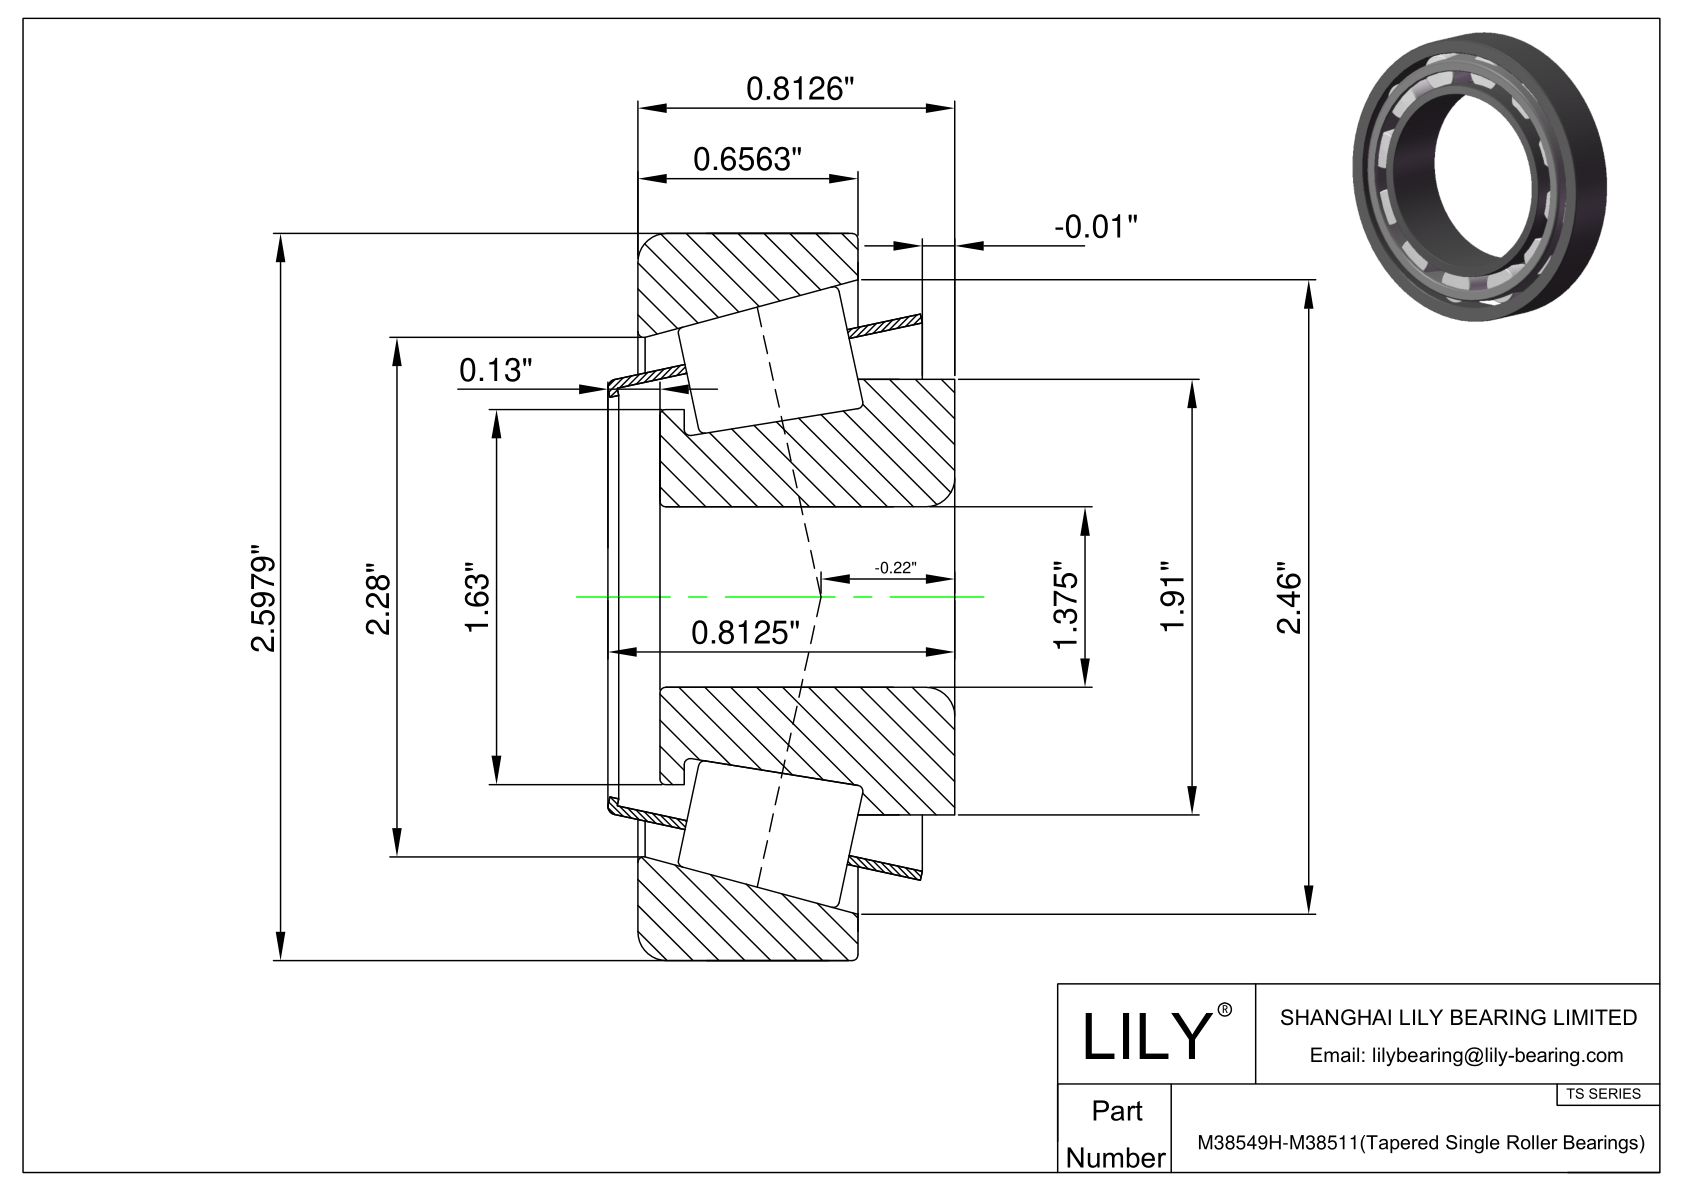 M38549H-M38511 TS (Tapered Single Roller Bearings) (Imperial) cad drawing